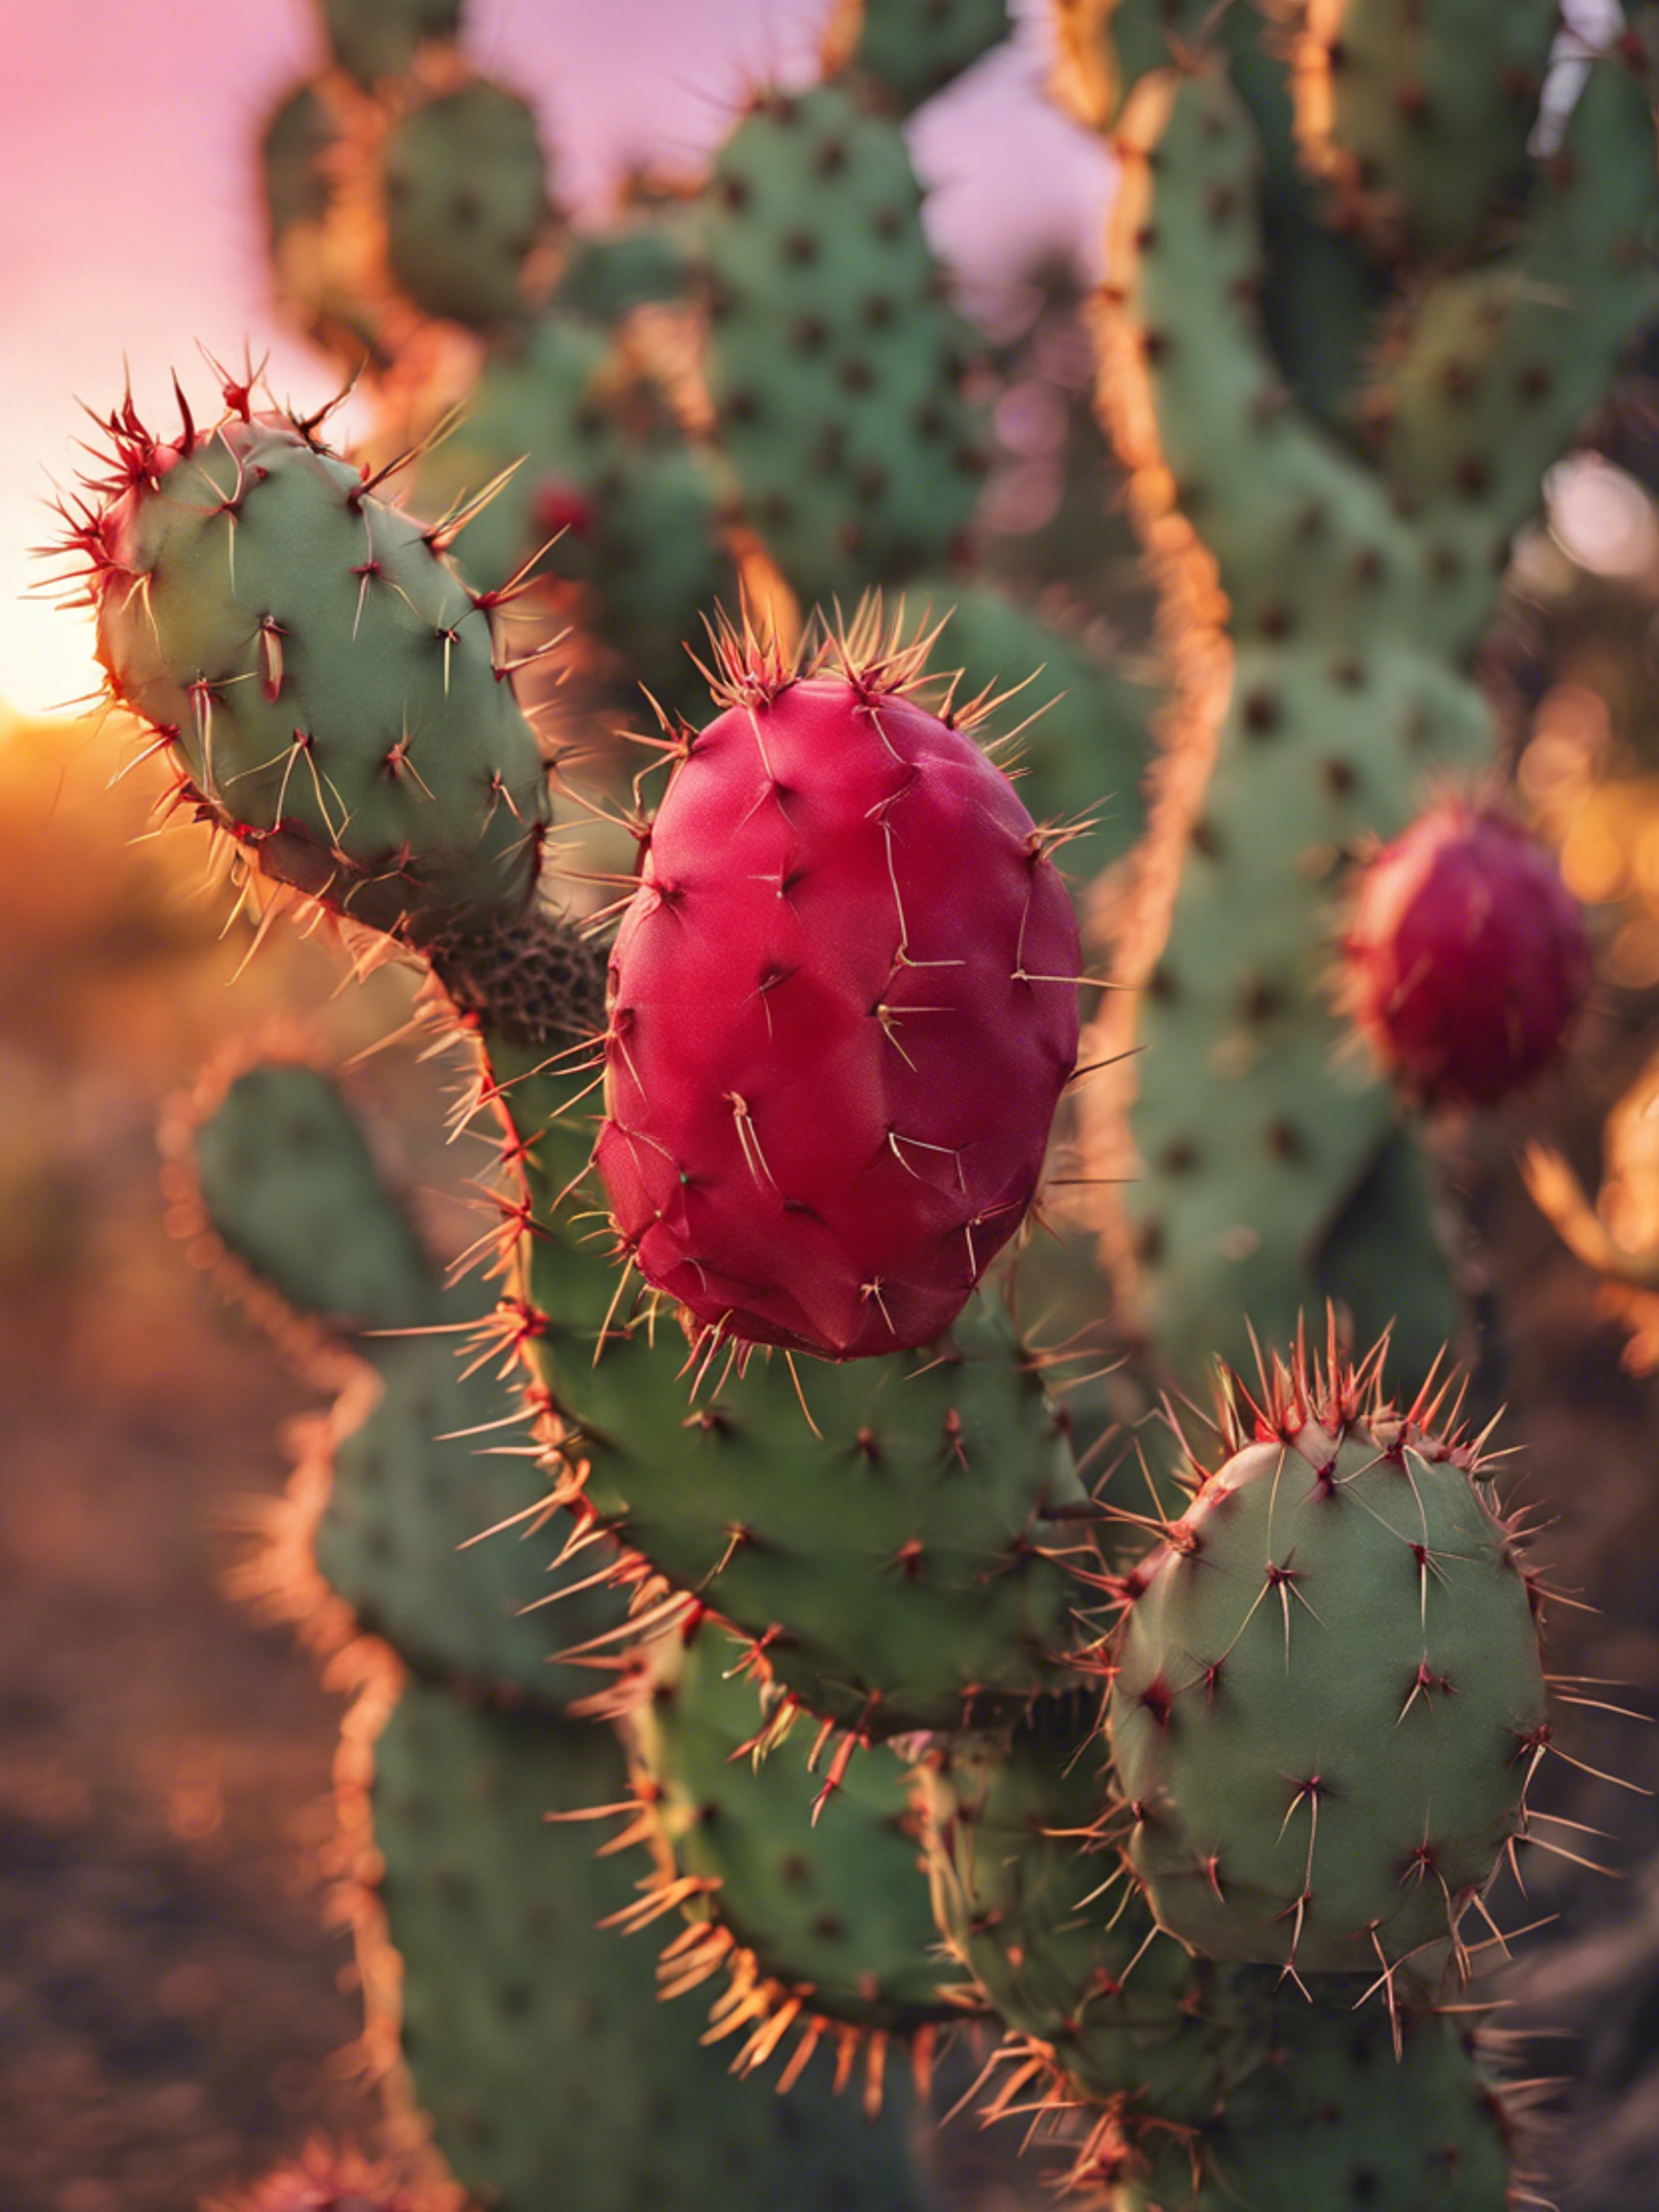 A prickly pear cactus with ripe, red fruits against a sunset background. کاغذ دیواری[5965817ee192450fa25b]